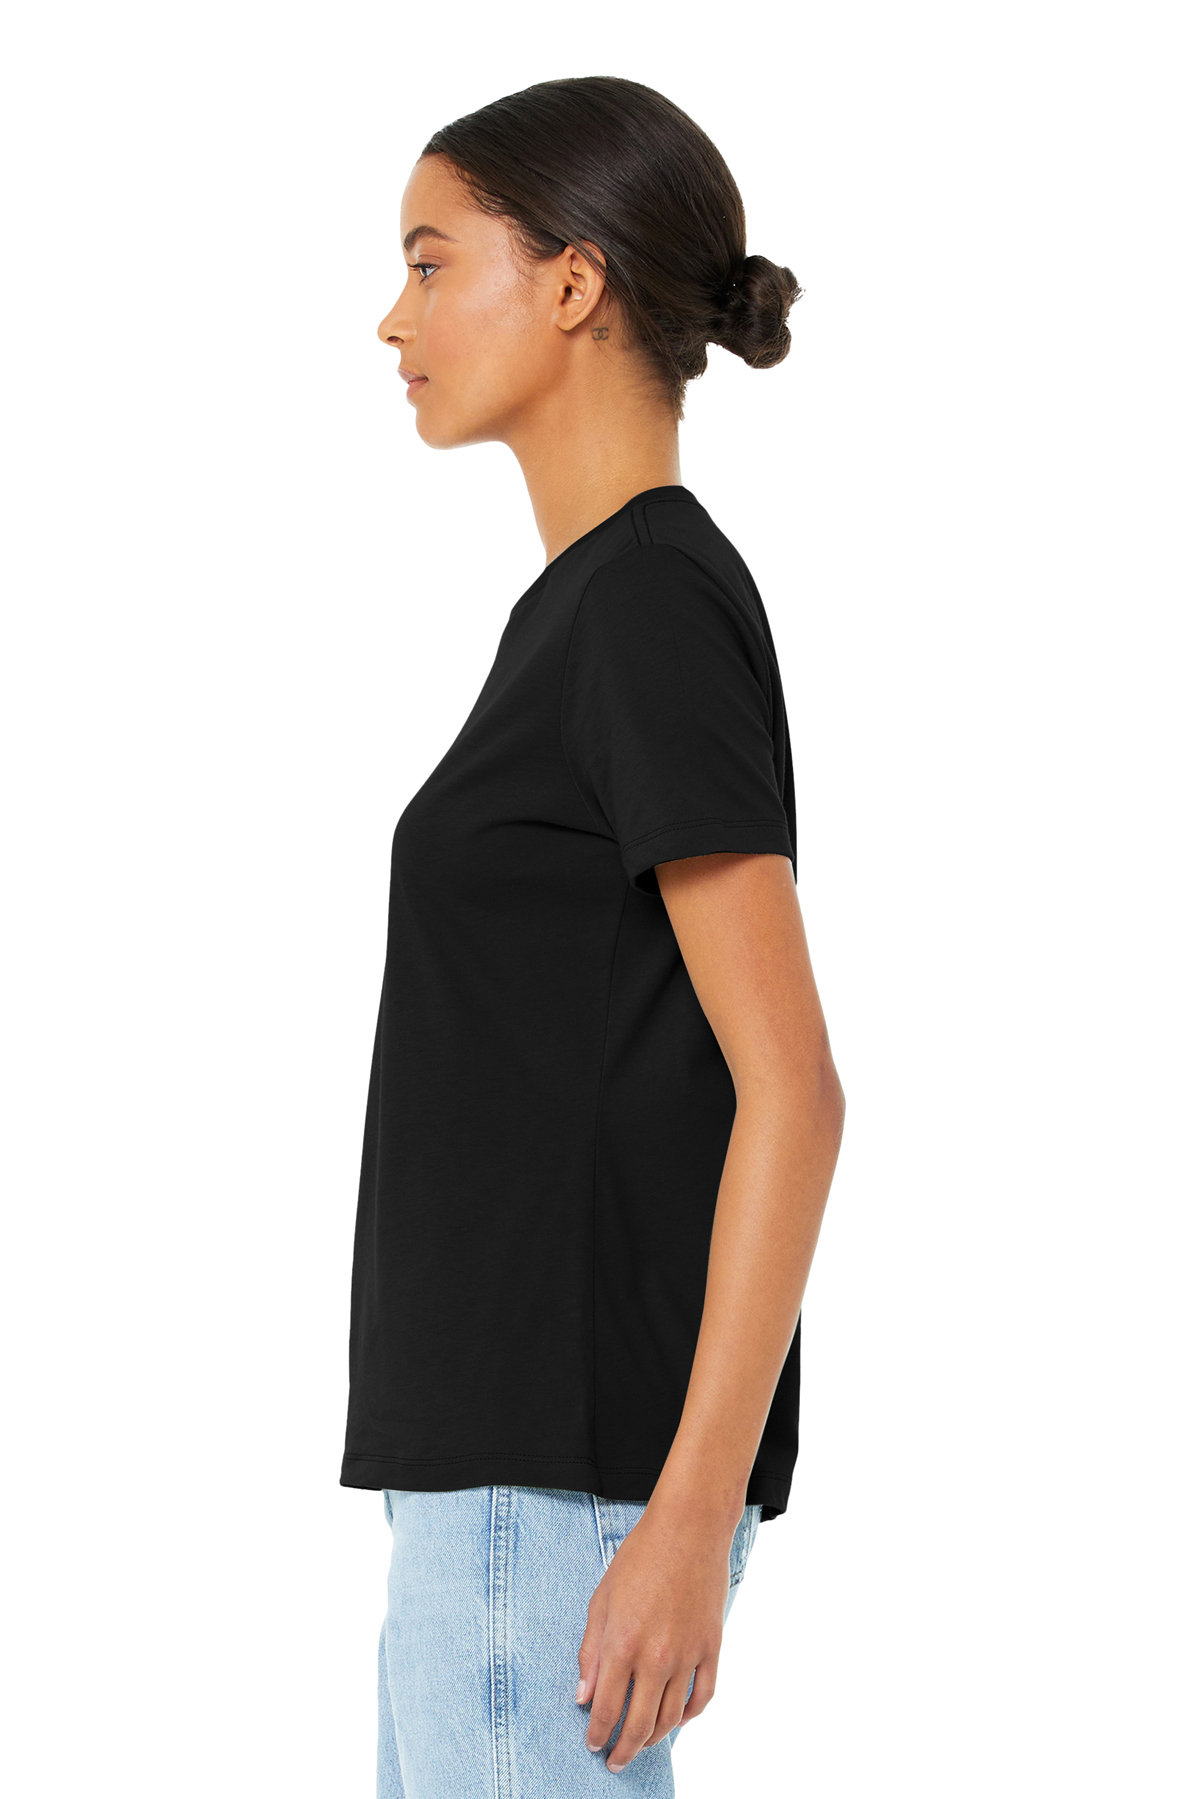 BELLA+CANVAS Women's Relaxed Jersey Short Sleeve Tee, Product